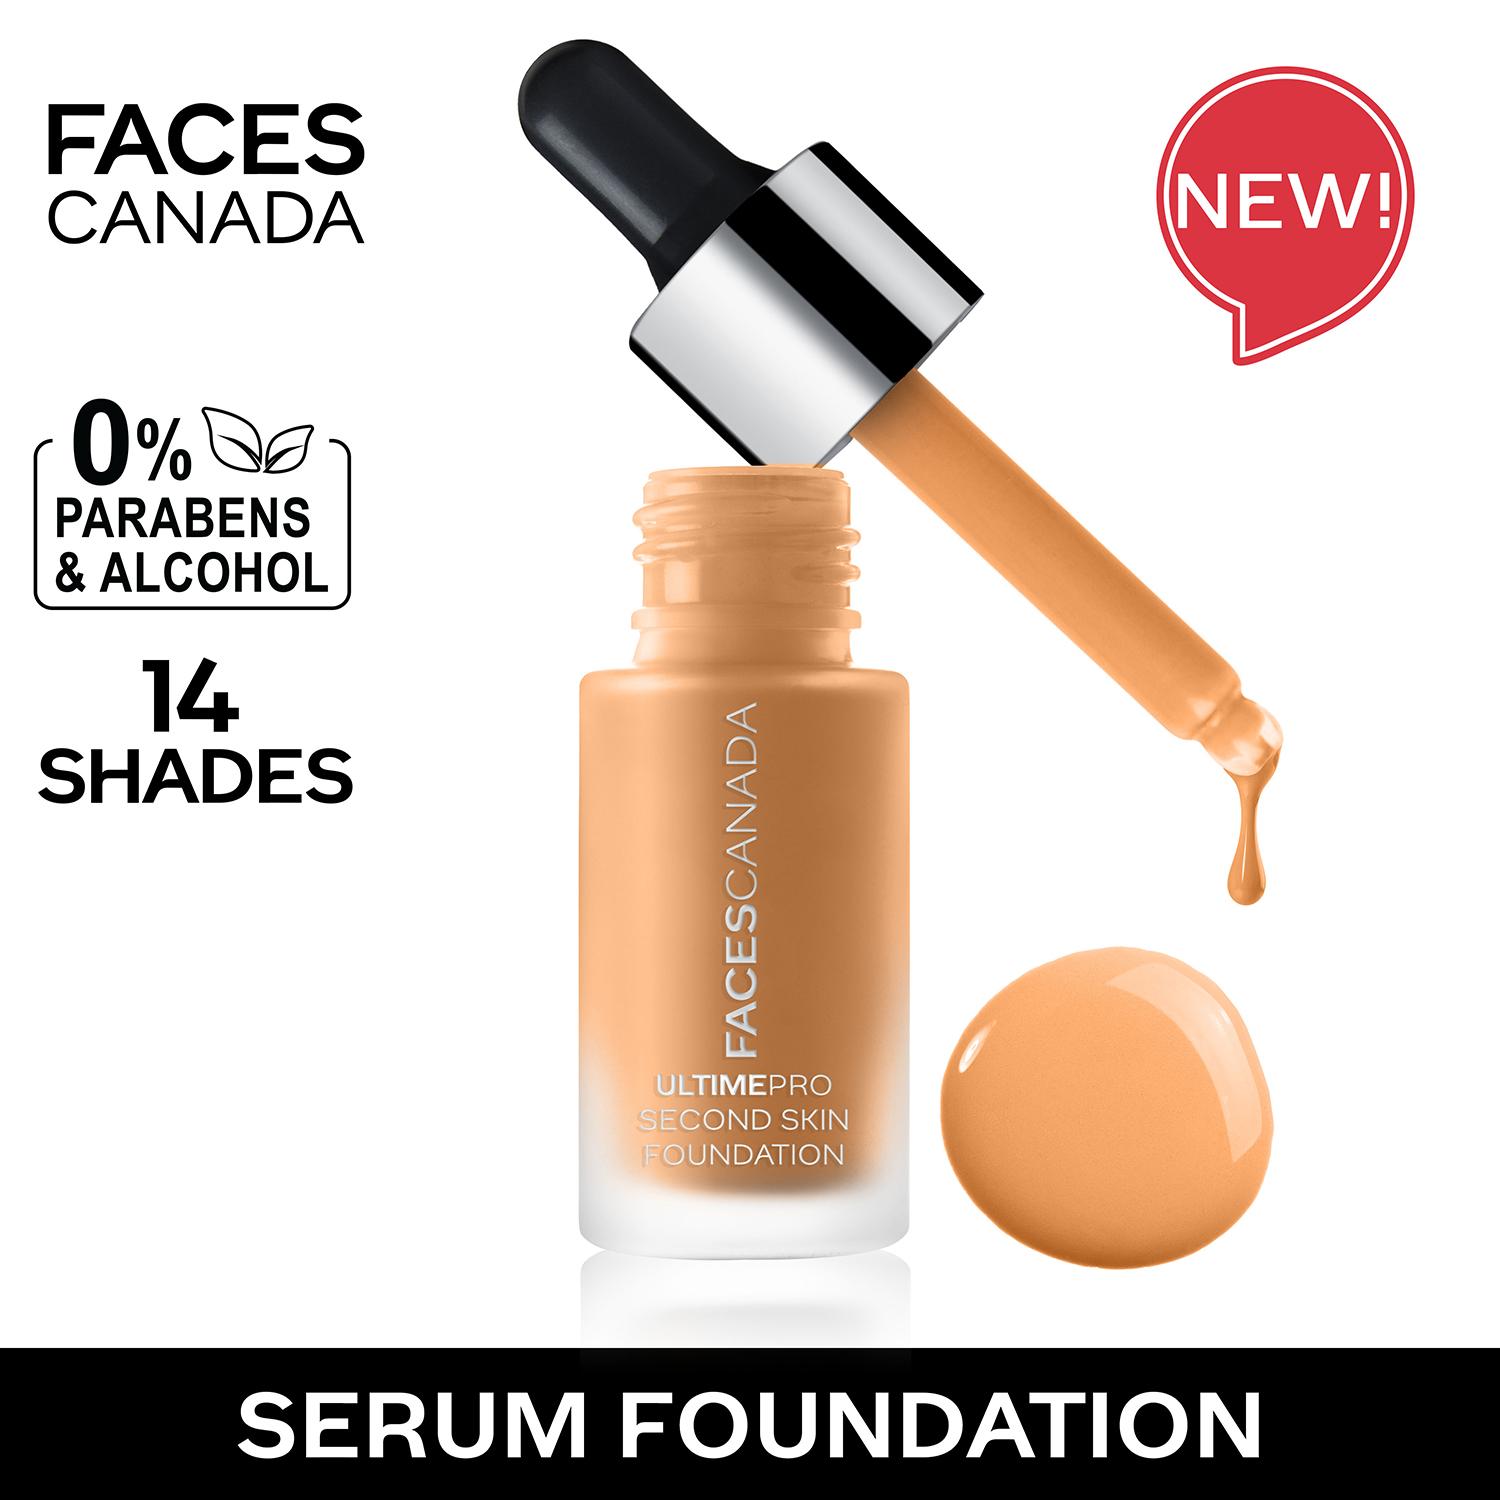 Faces Canada | Faces Canada Ultime Pro Second Skin Foundation - 02 Foundation Natural (15ml)